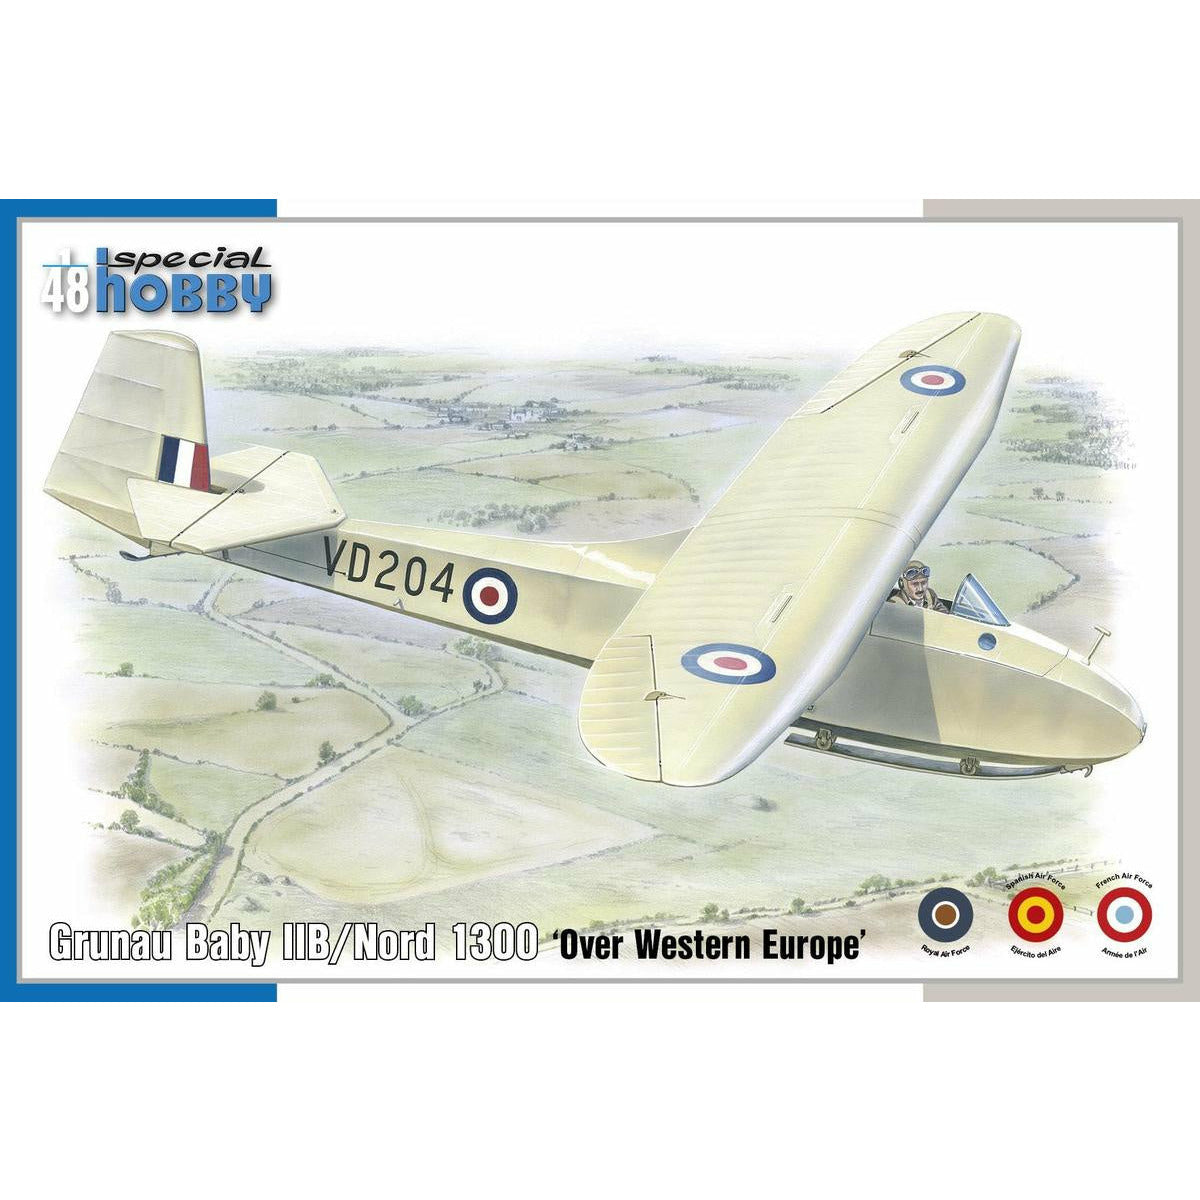 Grunau Baby llB/Nord 1300 Over Western Europe 1/48 #SH48203 by Special Hobby